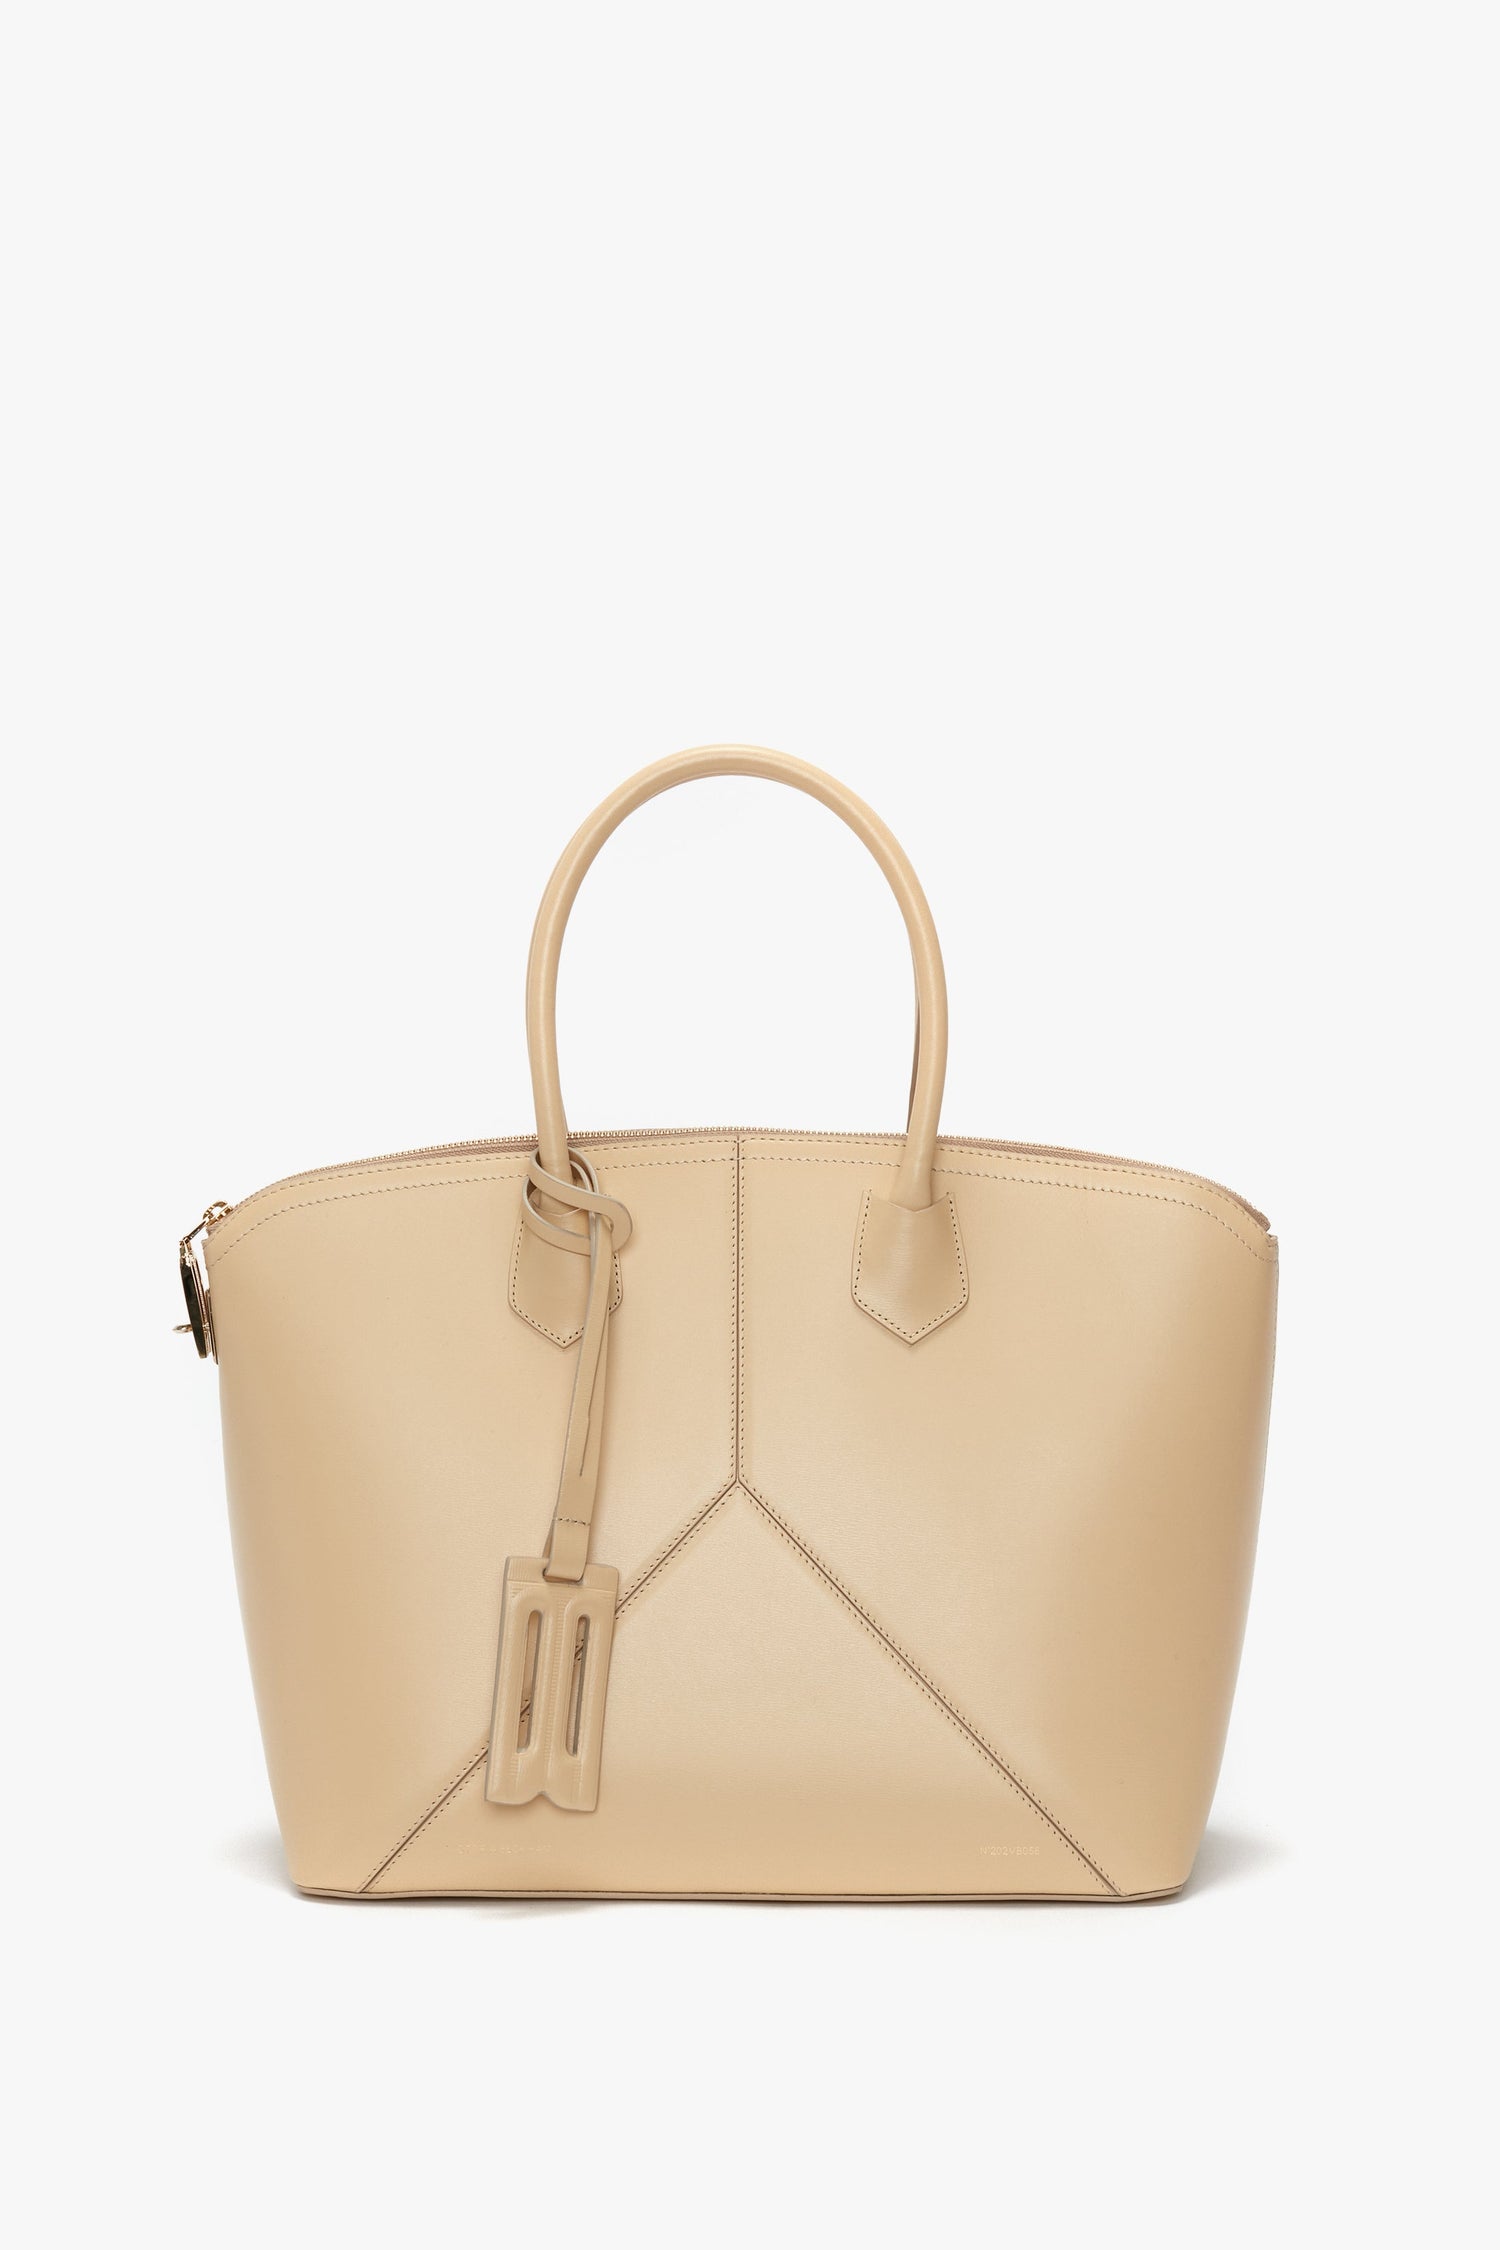 A beige Victoria Beckham Victoria Bag In Sesame Leather with leather panels, curved handles, and a decorative tag hanging from one handle features an adjustable strap for versatility.